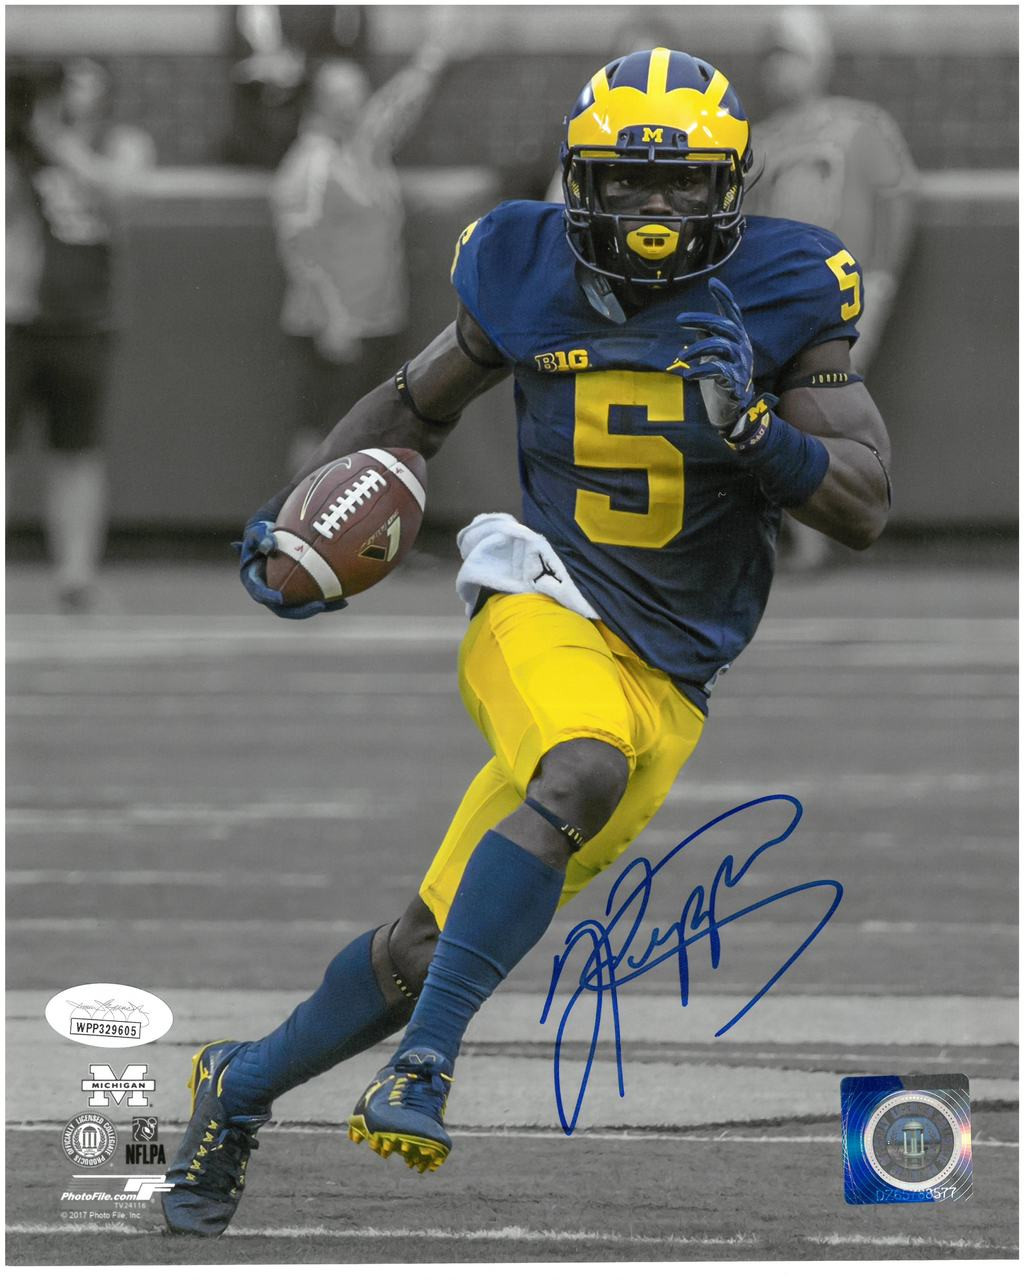 JABRILL PEPPERS SIGNED MICHIGAN WOLVERINES 8x10 PHOTO BROWN JUG BECKETT COA 